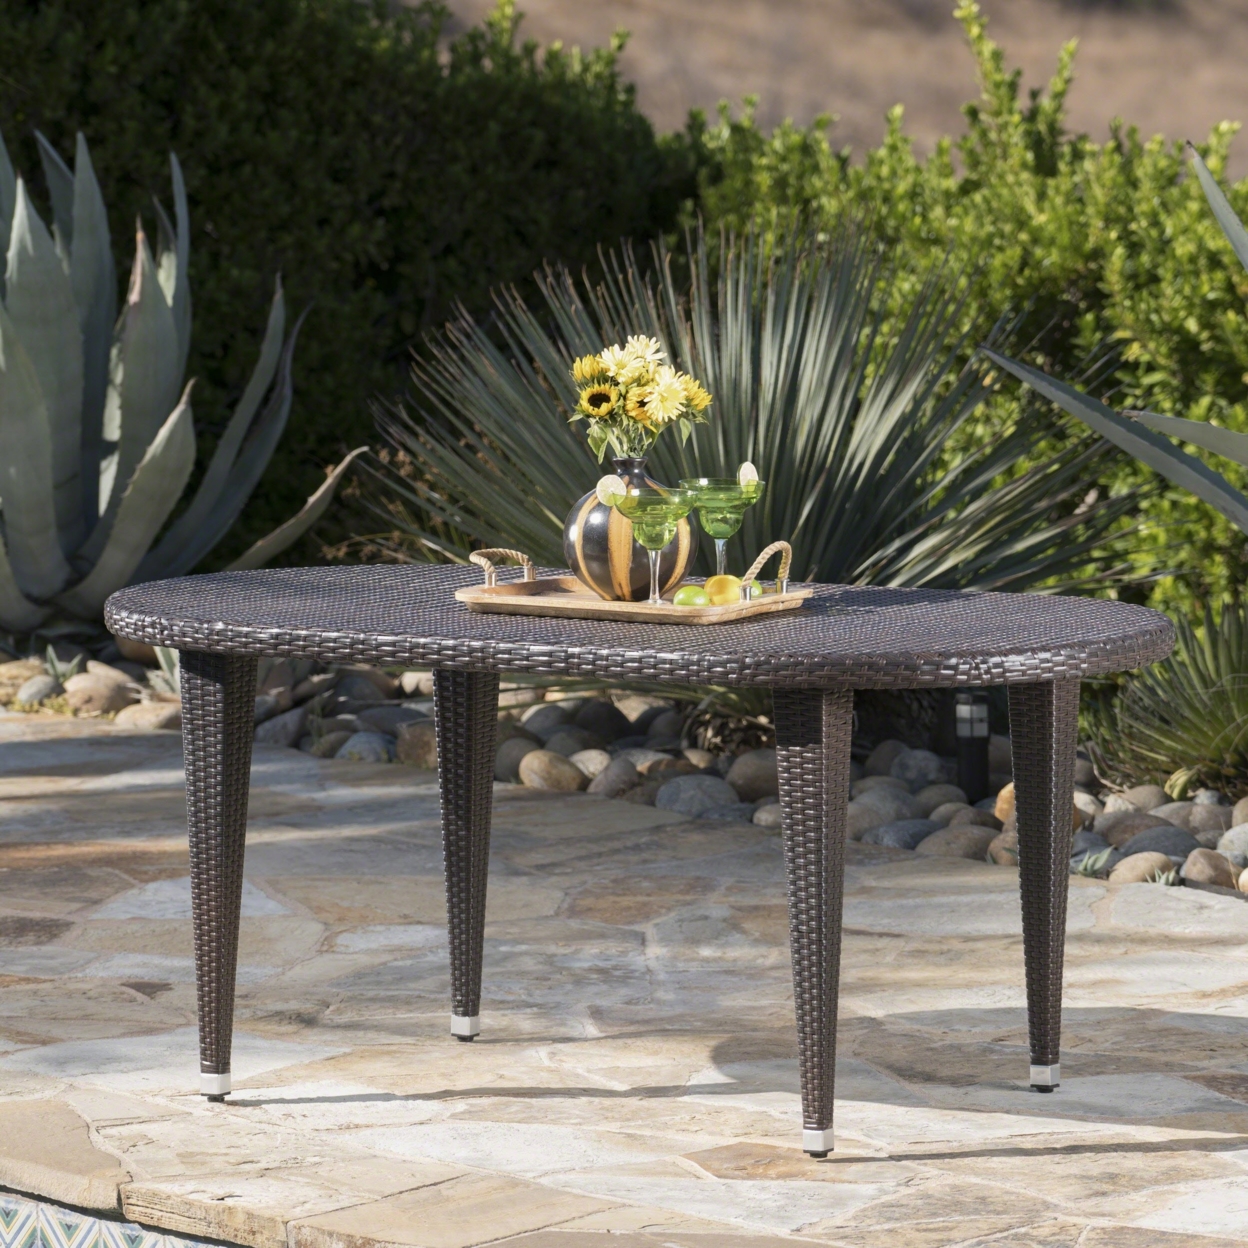 Domo Outdoor 69 Inch Wicker Oval Dining Table - Multi-brown